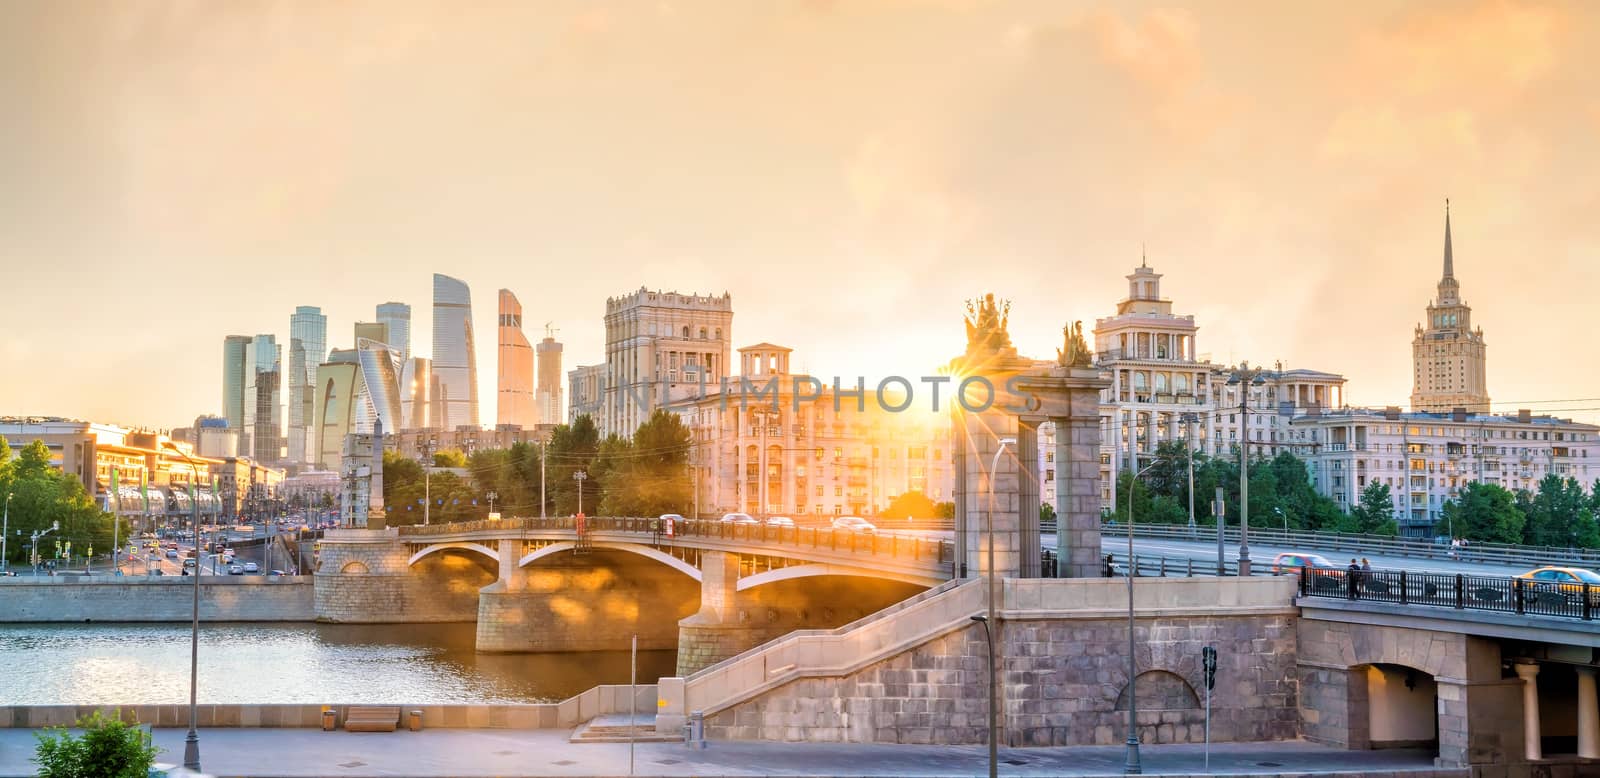 Moscow City skyline business district and Moscow River in Russia at sunset